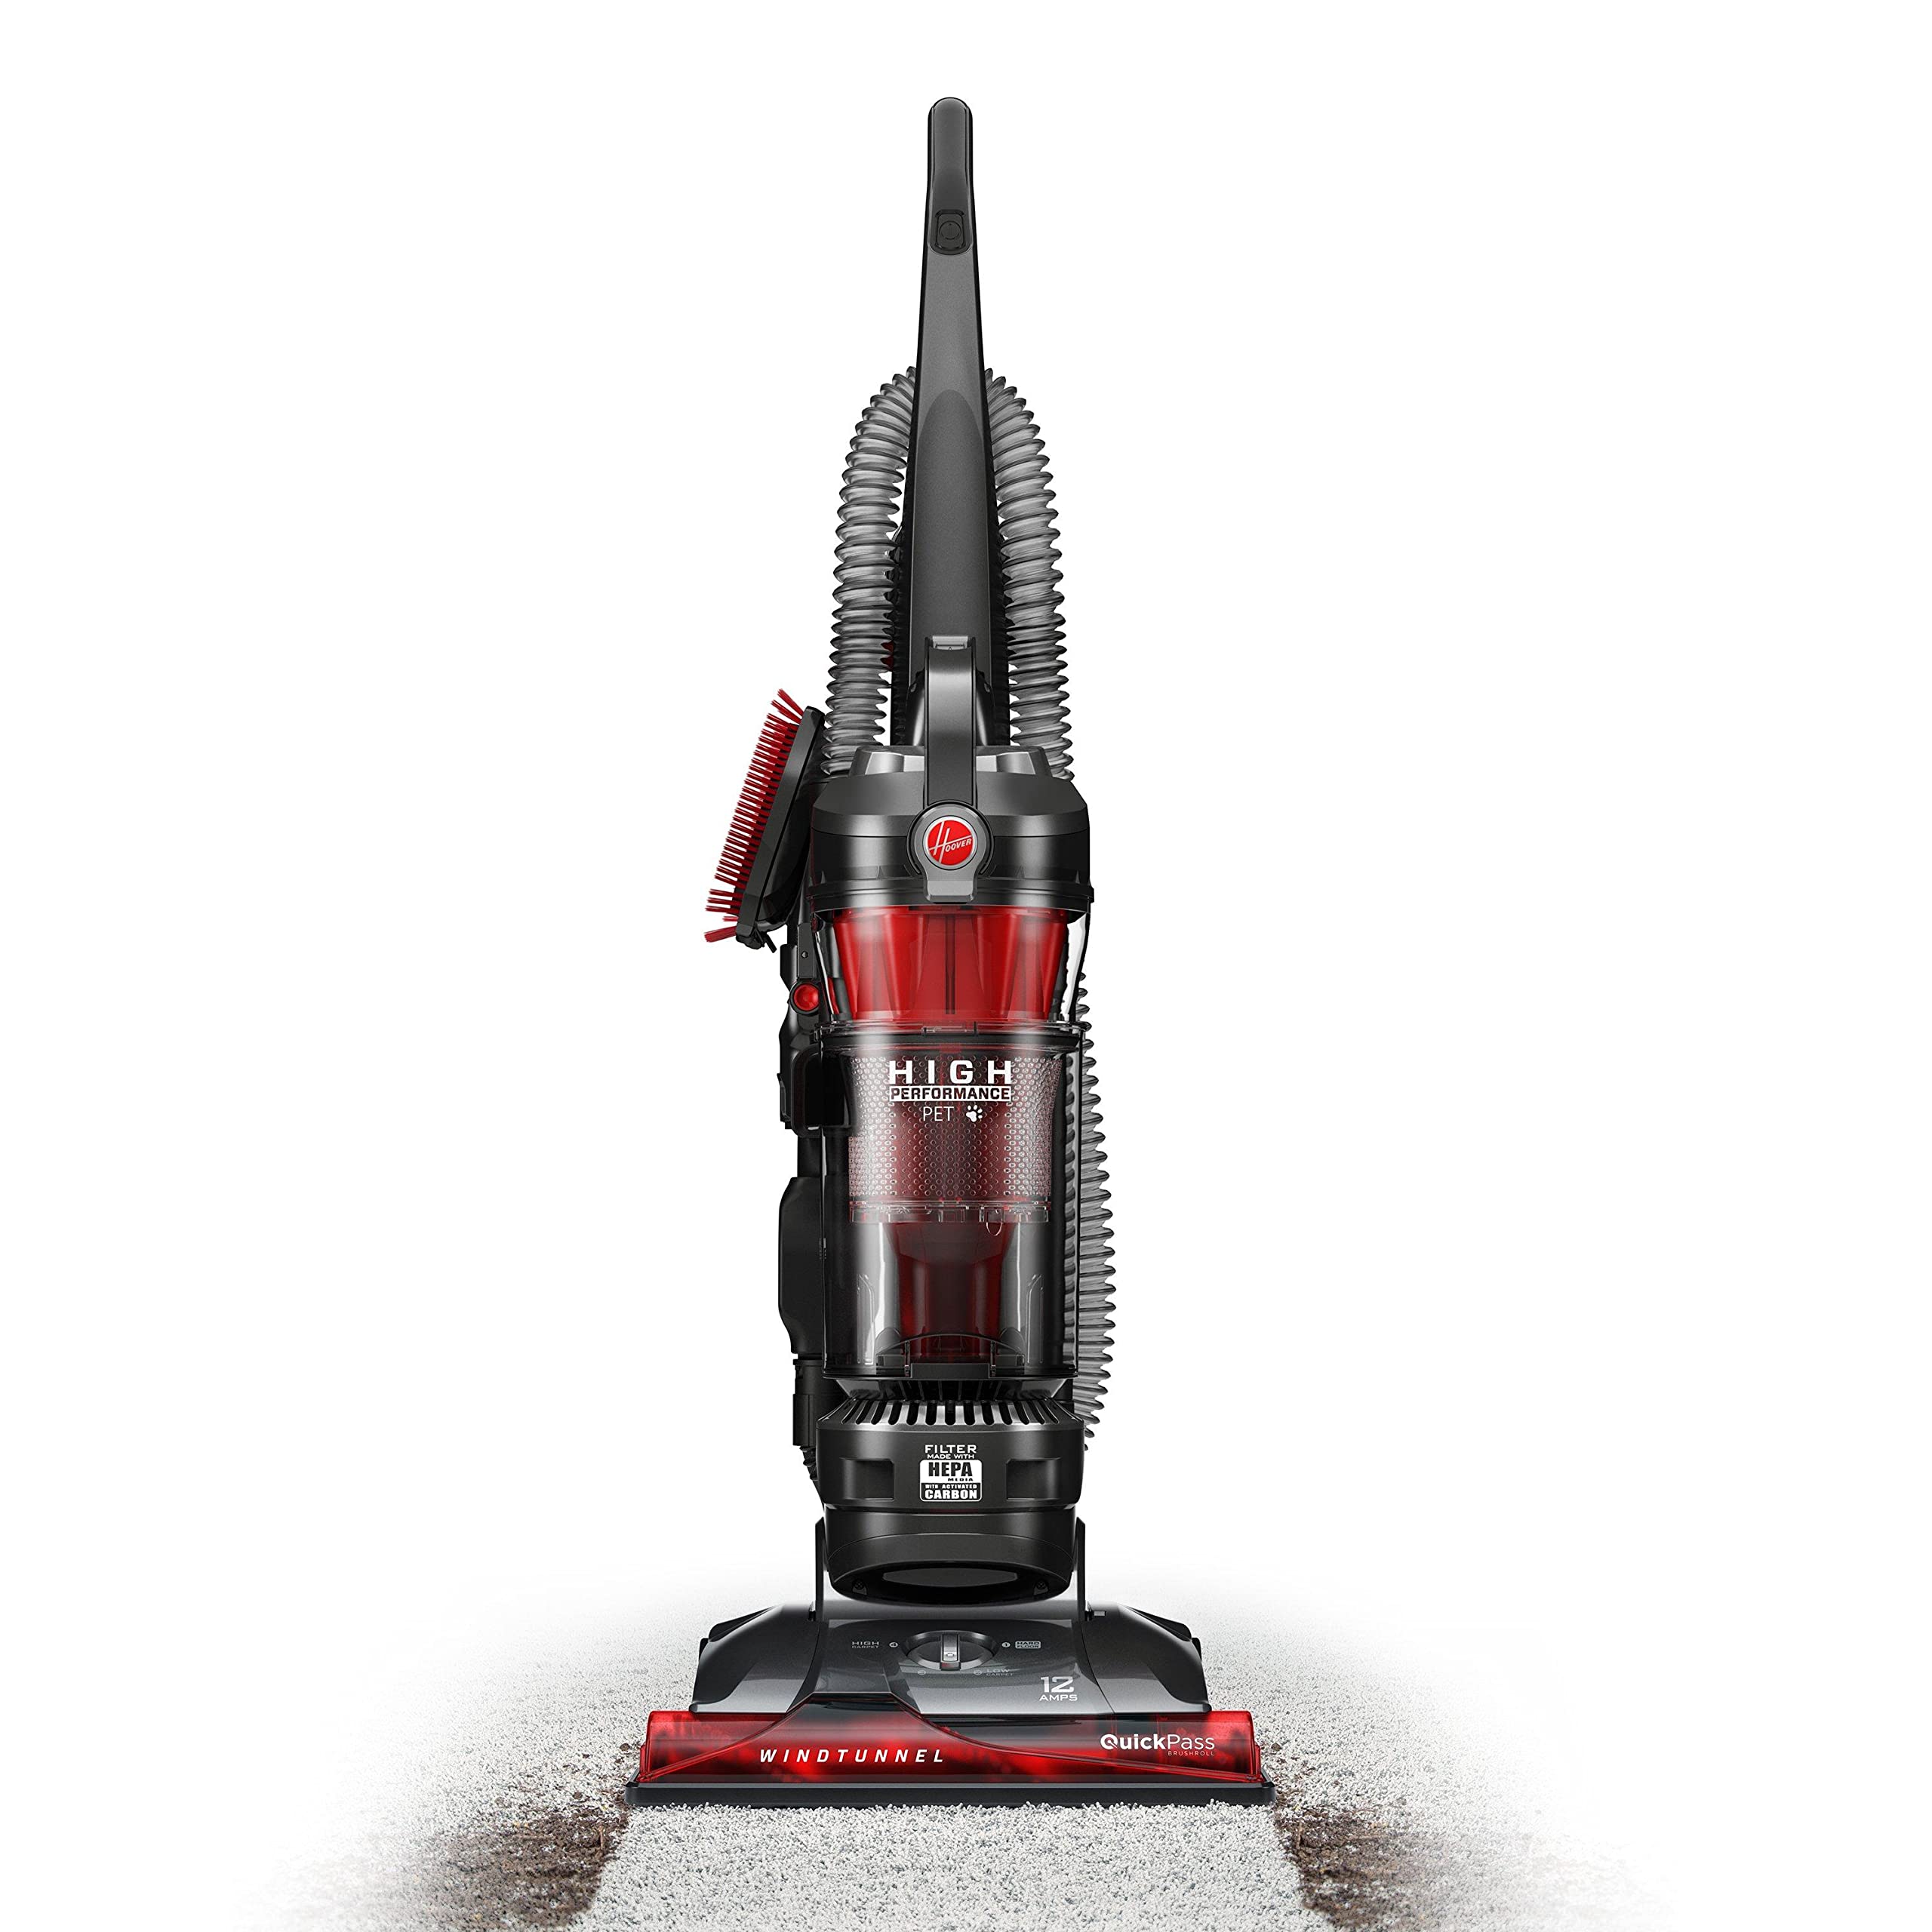 Hoover WindTunnel 3 Max Performance Pet Bagless Upright Vacuum Cleaner w/ Crevice, Dusting, & Turbo Tools (UH72625) $120 + Free Shipping